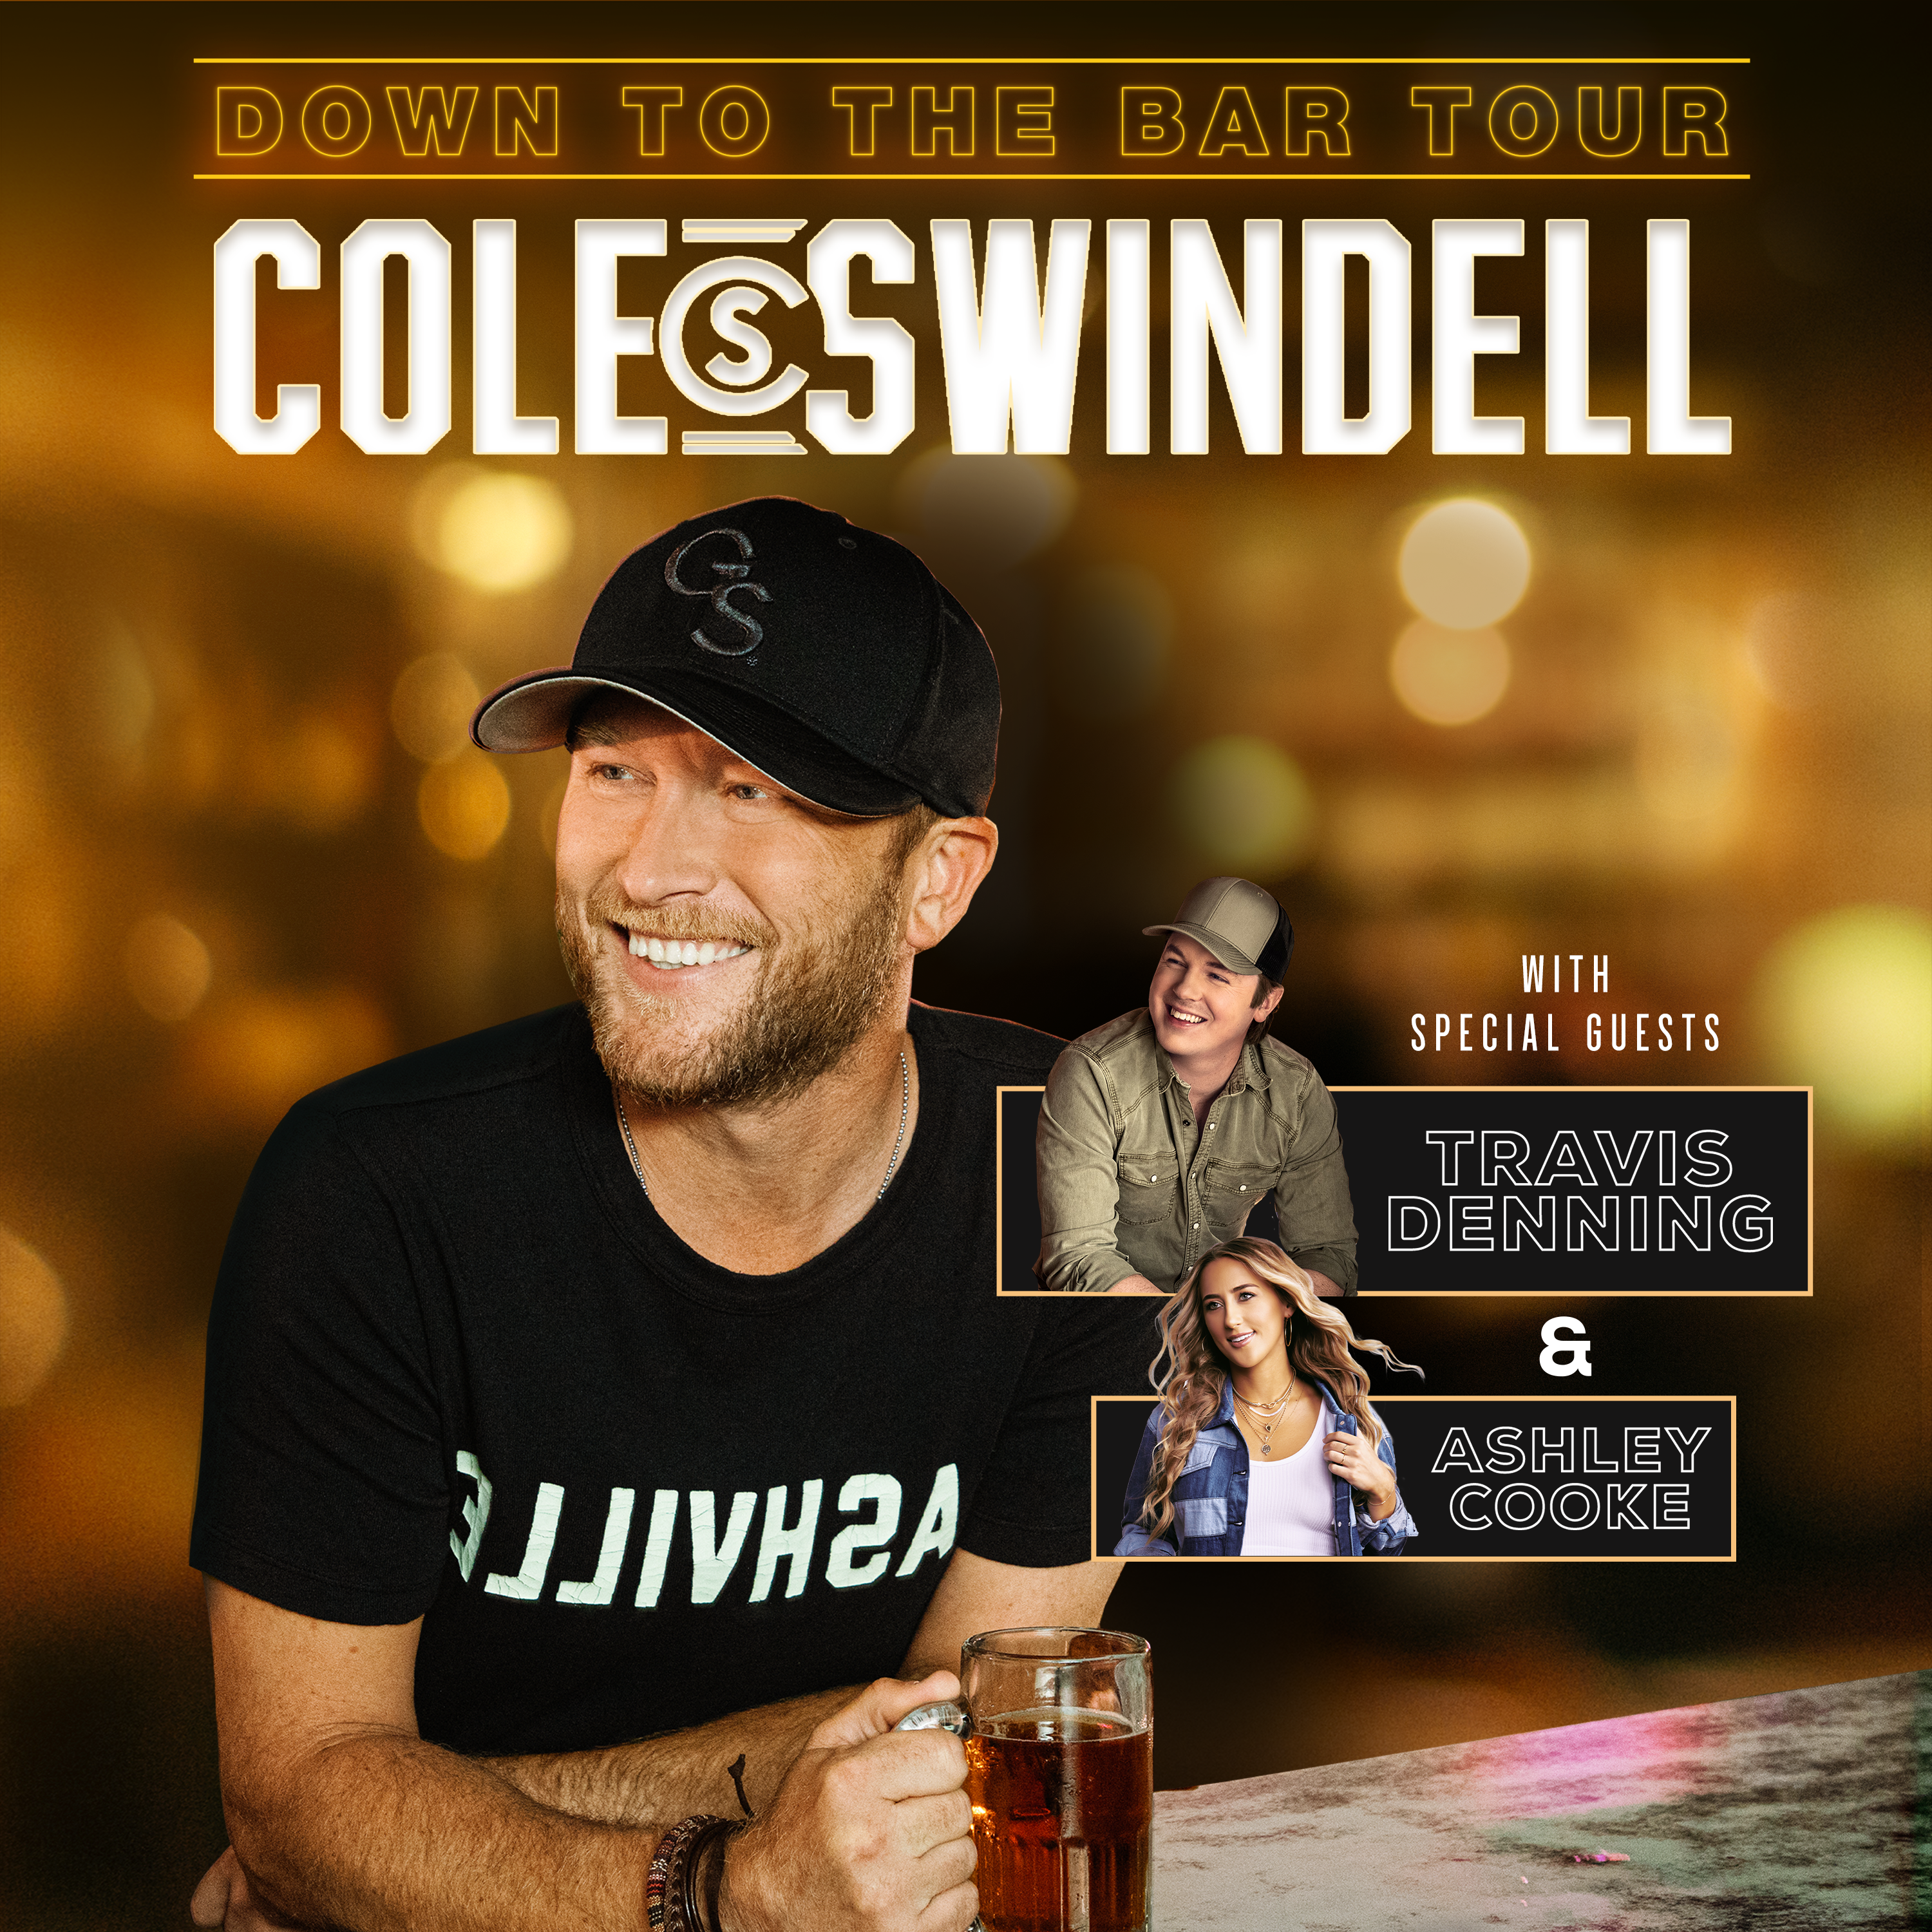 COLE SWINDELL LAUNCHES HIS HEADLINING DOWN TO THE BAR TOUR